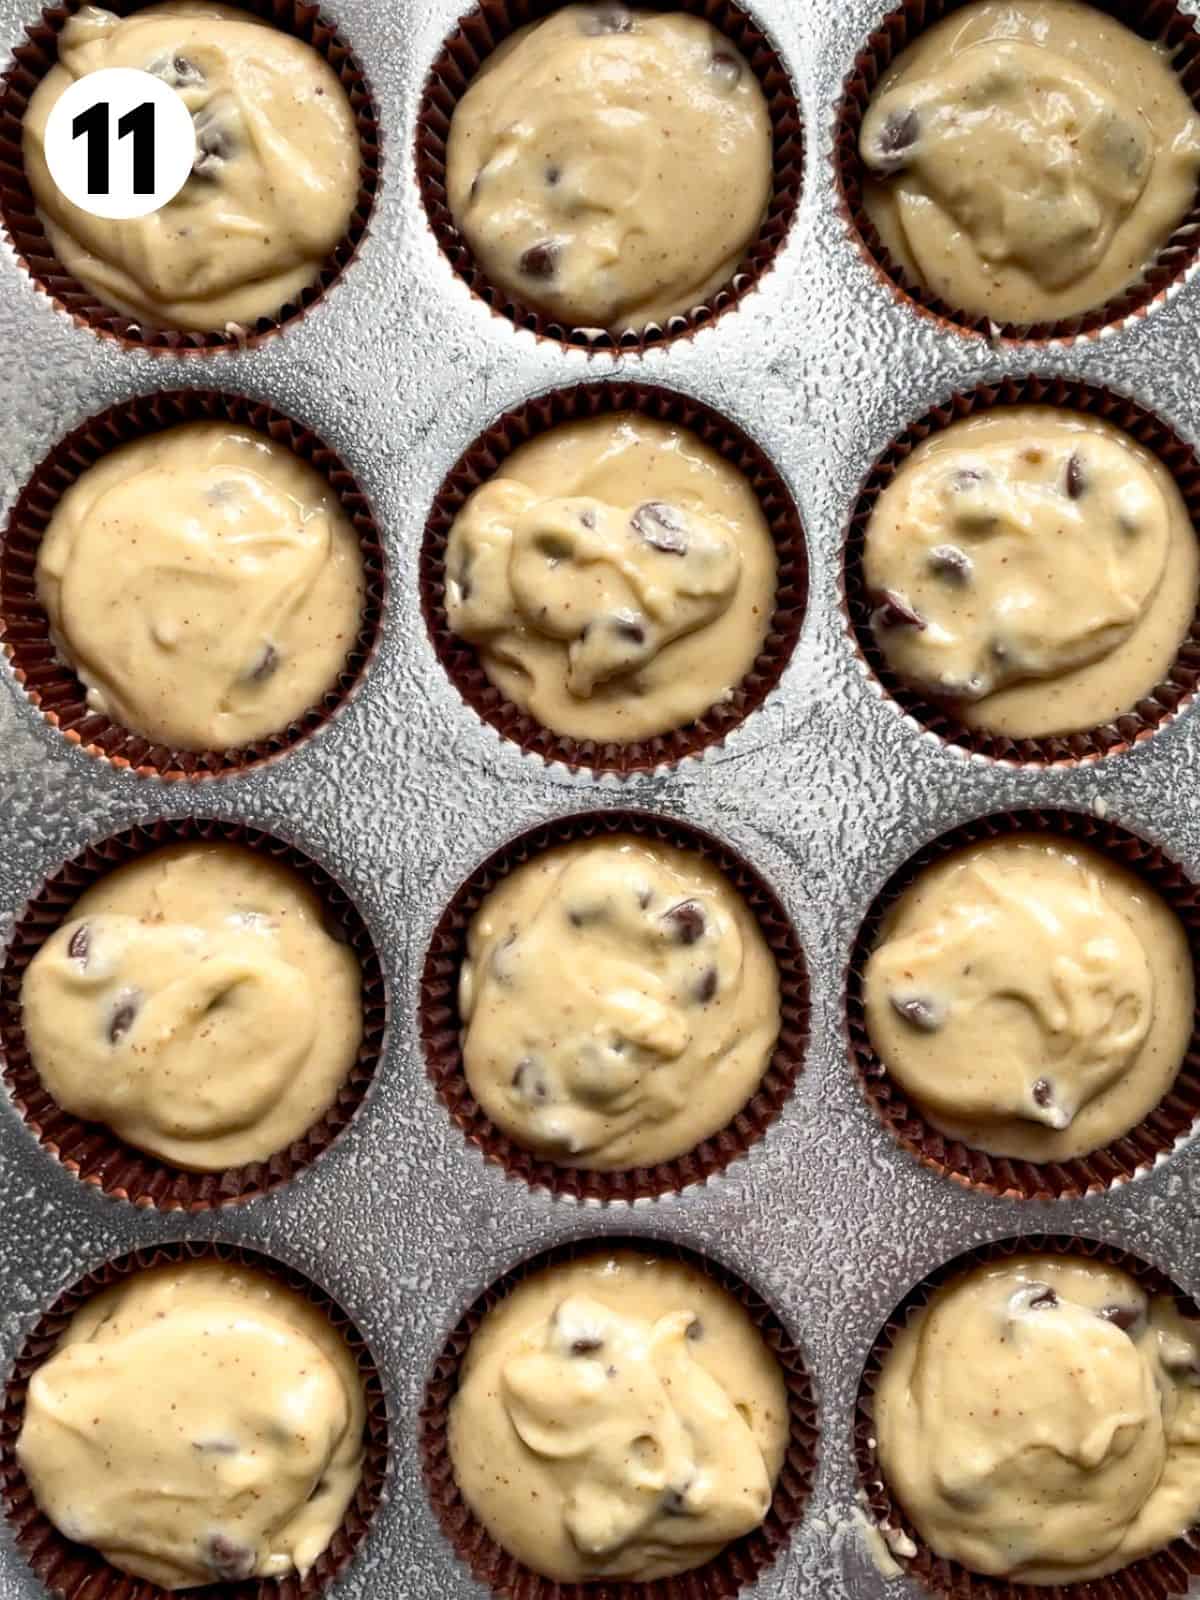 Brown butter chocolate chip muffin batter in the pan with brown liners.